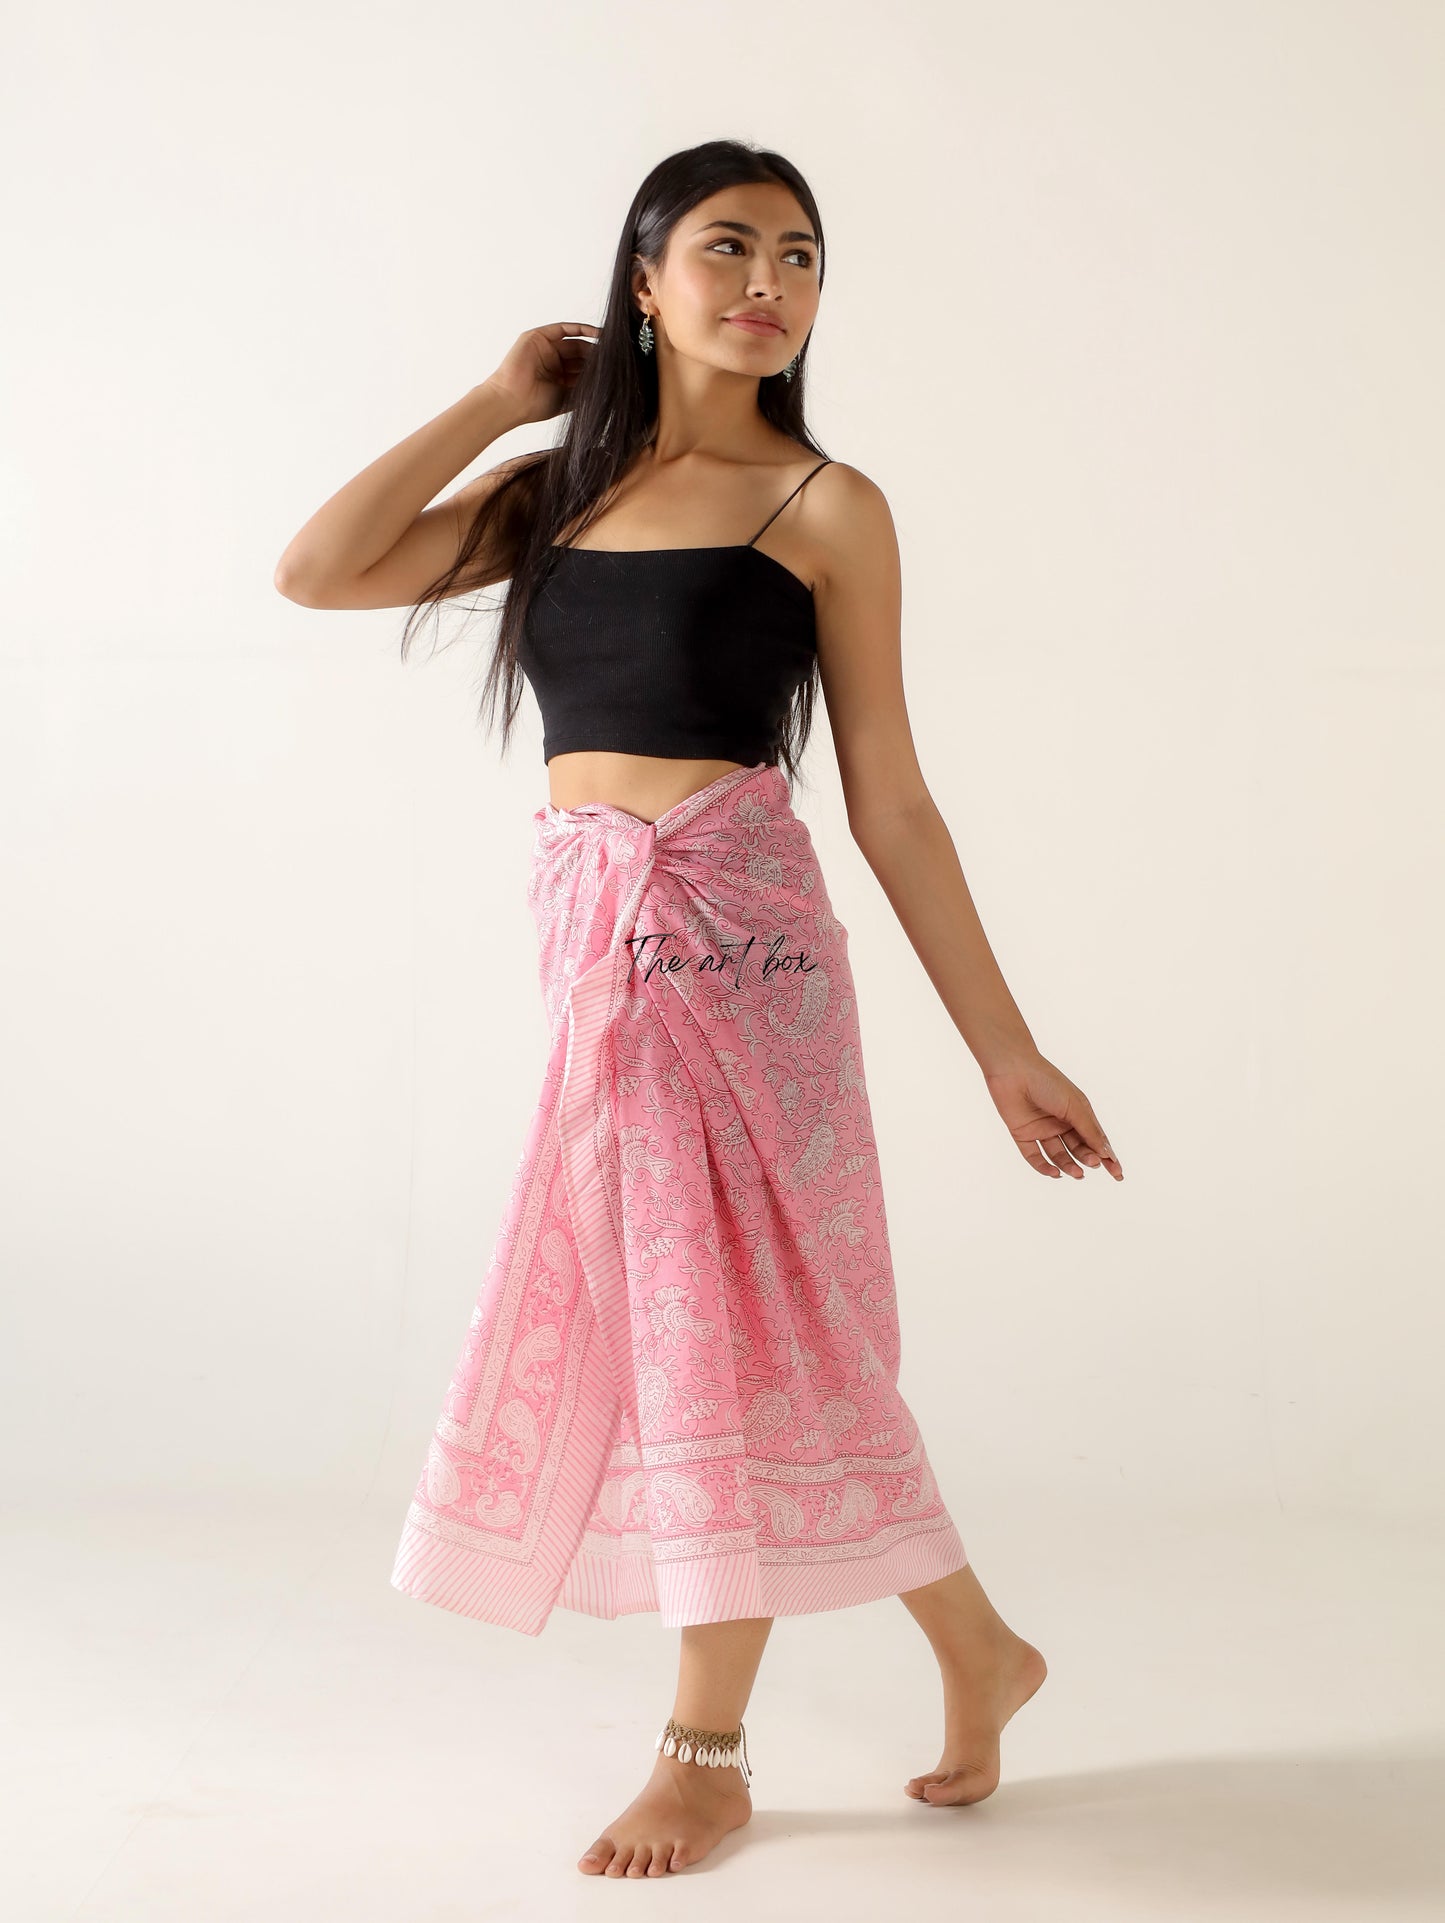 Petal Perfect: Floral Sarong Pareo for Stylish Sun-Kissed Looks